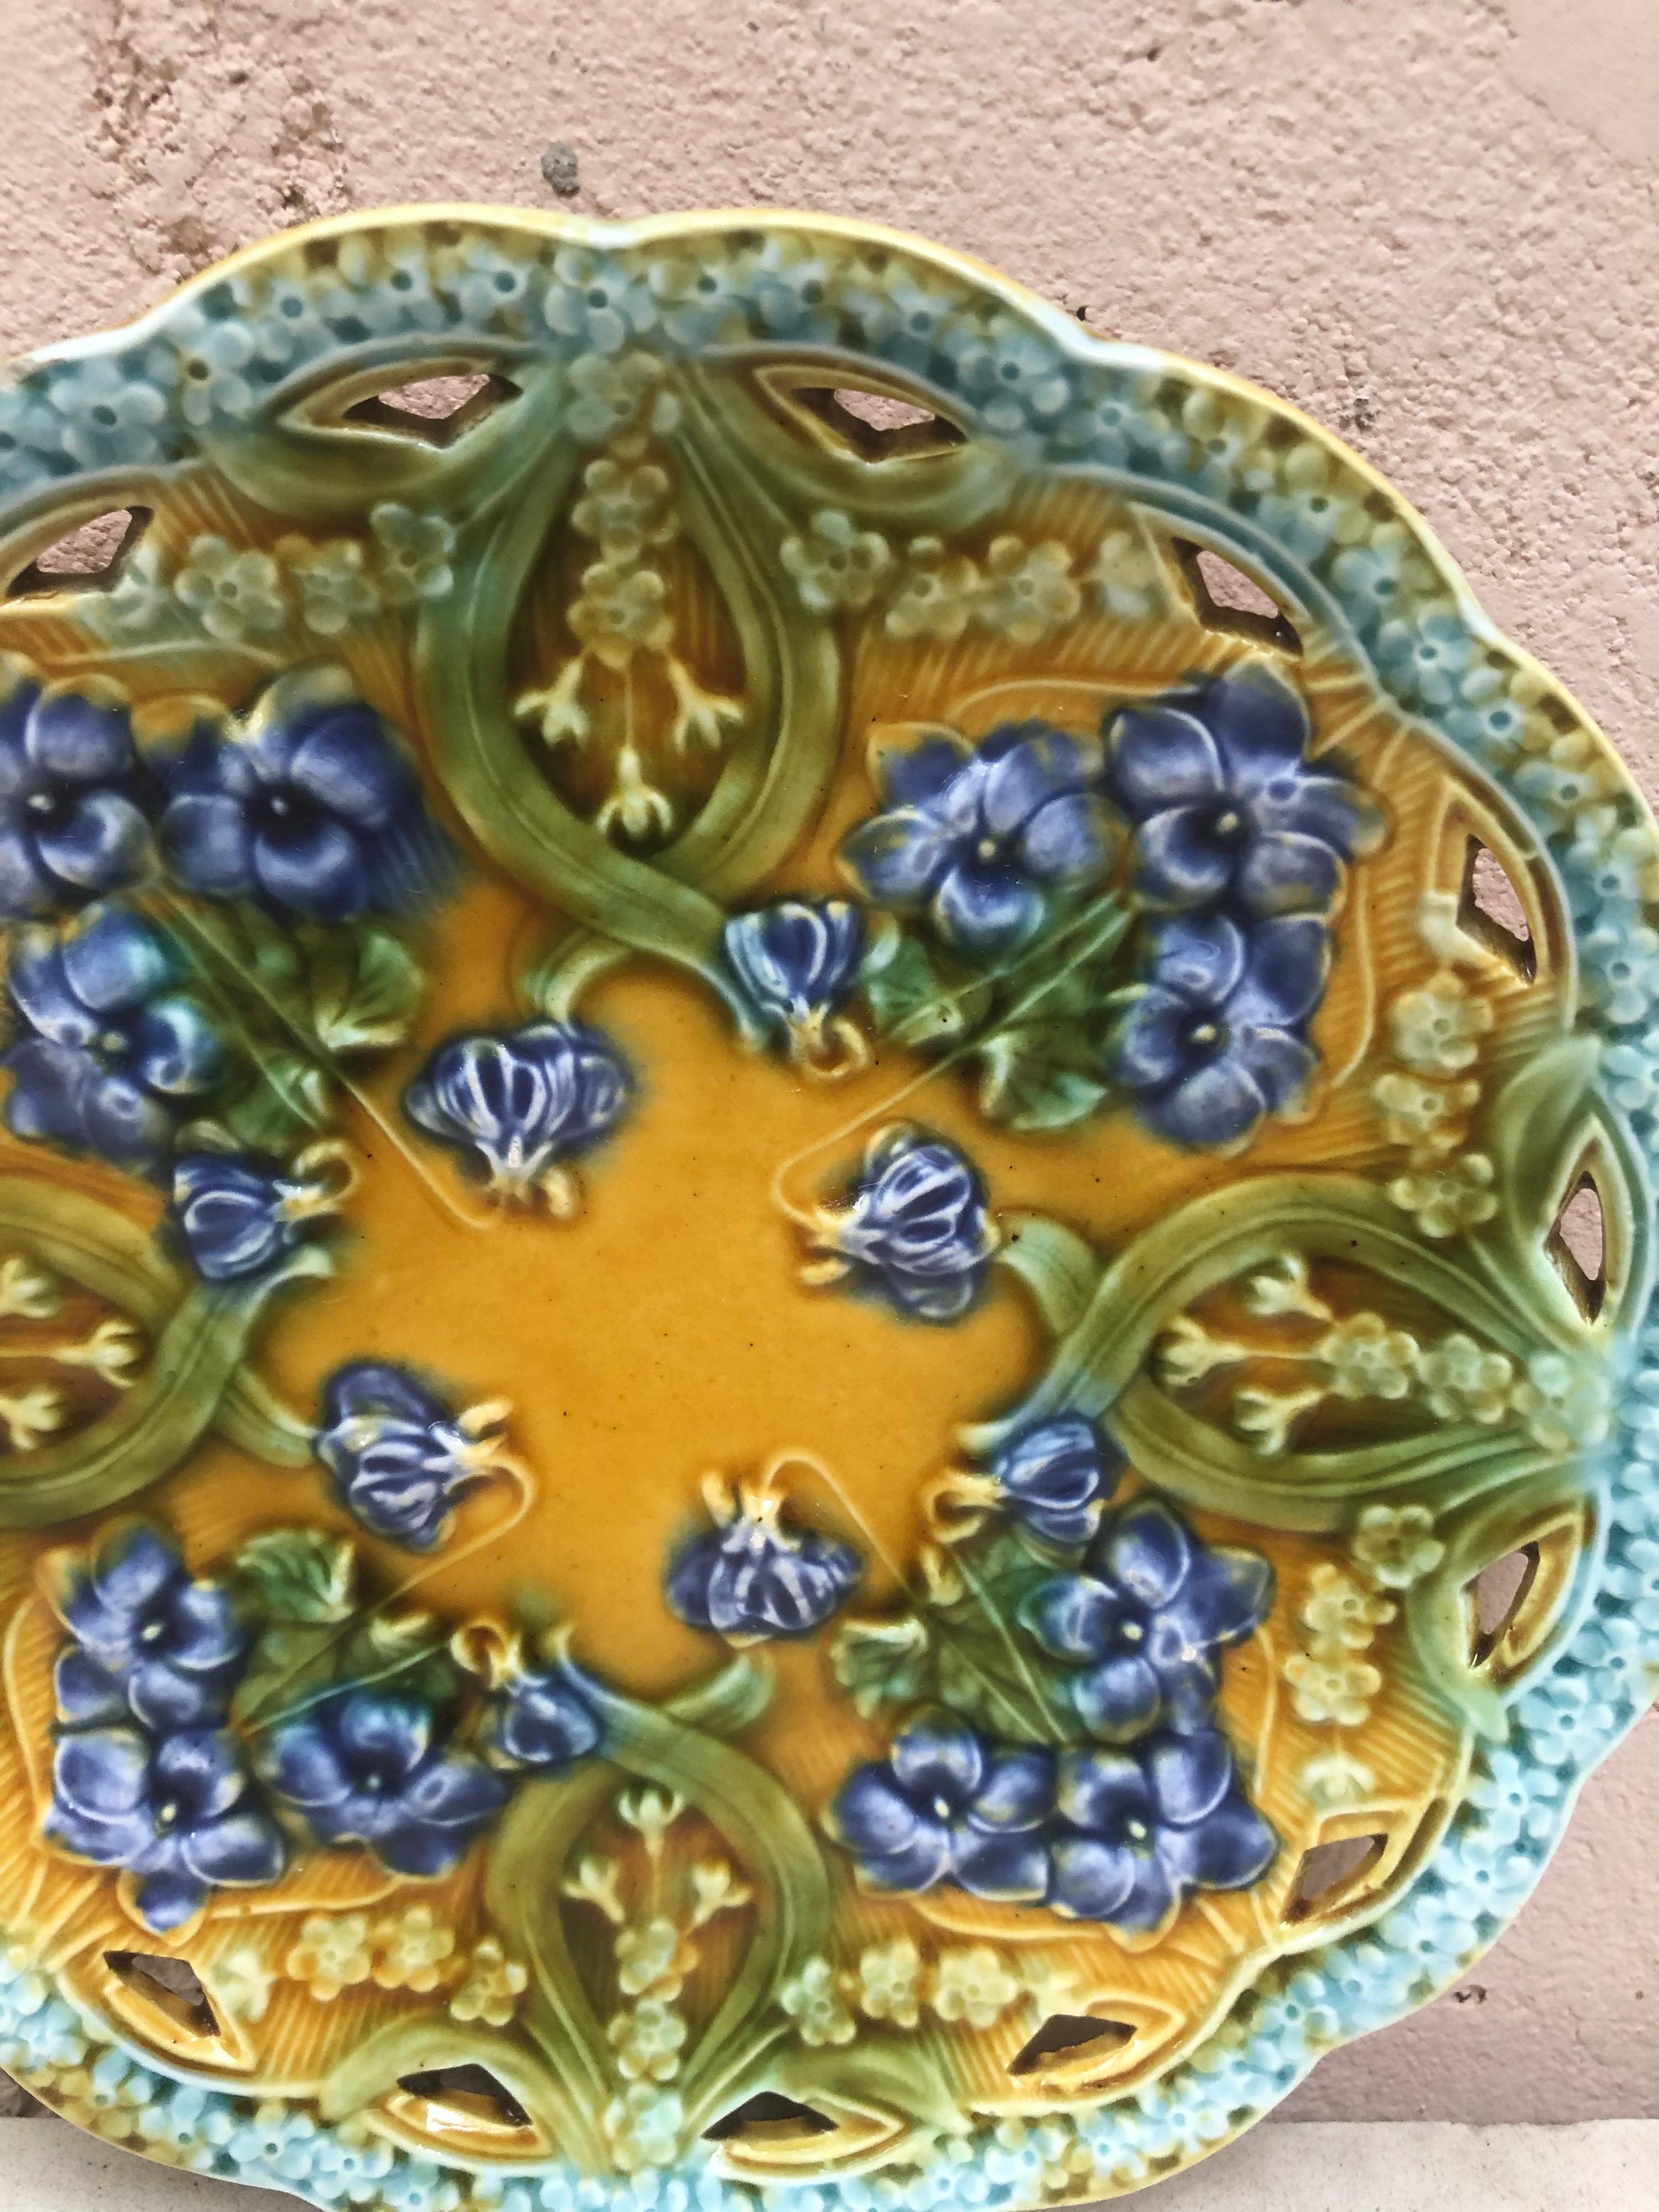 Small Colorful Majolica reticulated plate with violets Villeroy & Boch, circa 1900.
 